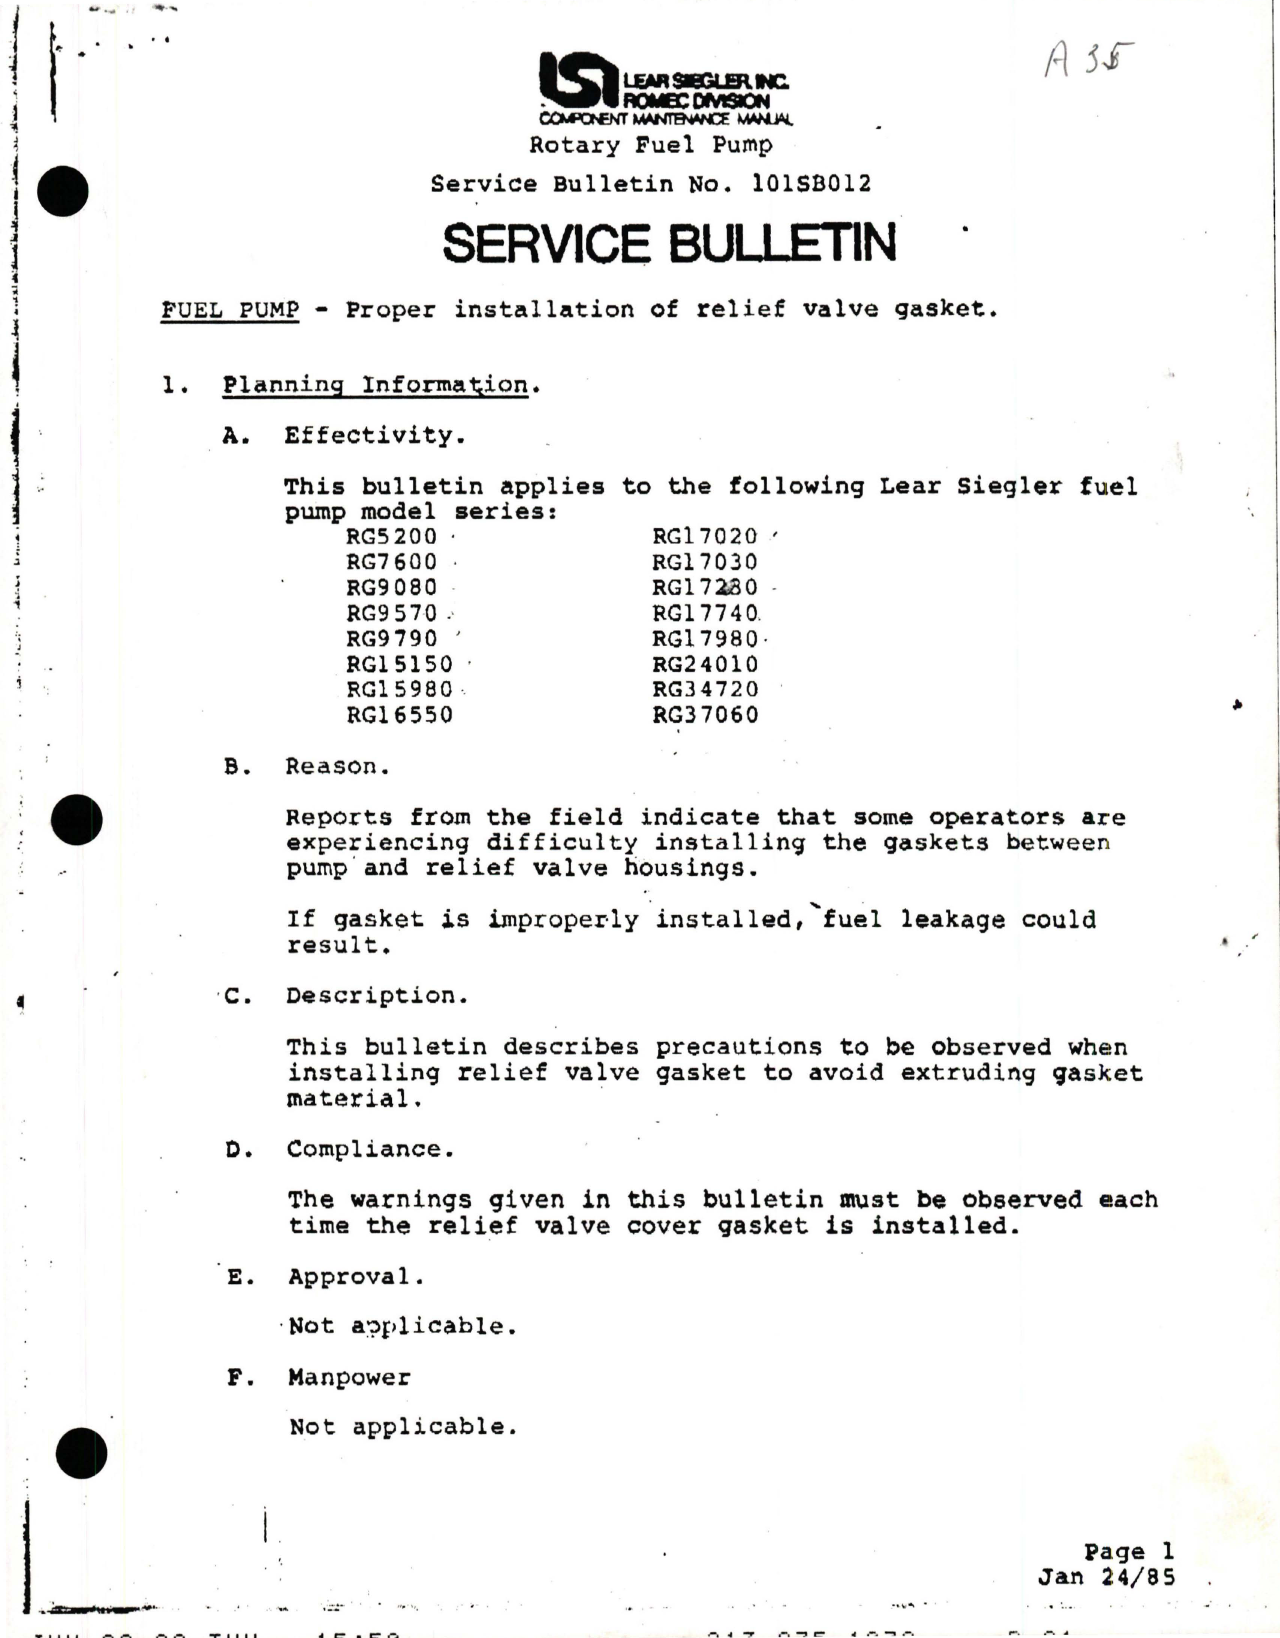 Sample page 1 from AirCorps Library document: Fuel Pump - Proper Installation of Relief Valve Gasket